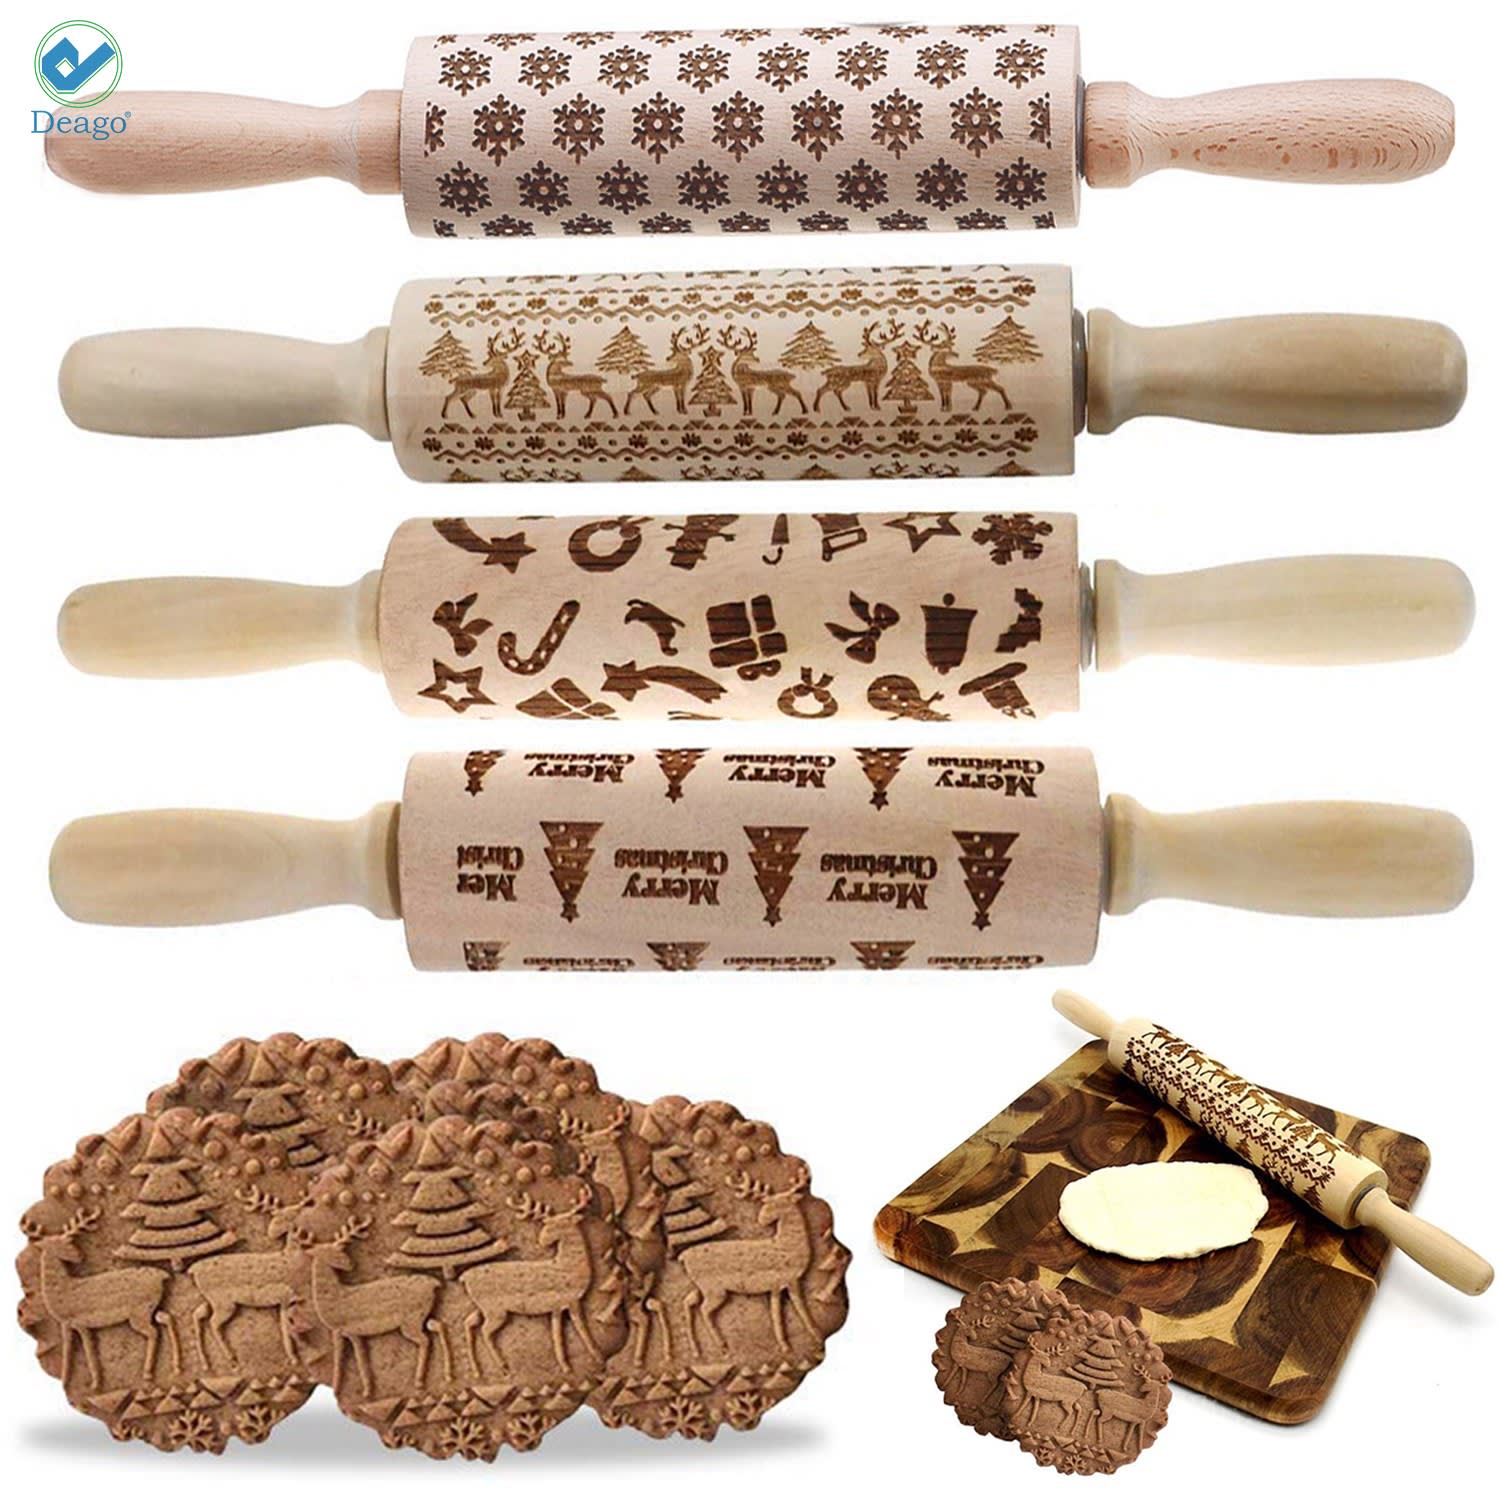 WOODEN ROLLING PIN WINTER STYLE DEERS CRESTMASTREES 4 size HANDMADE BAKING COOK 